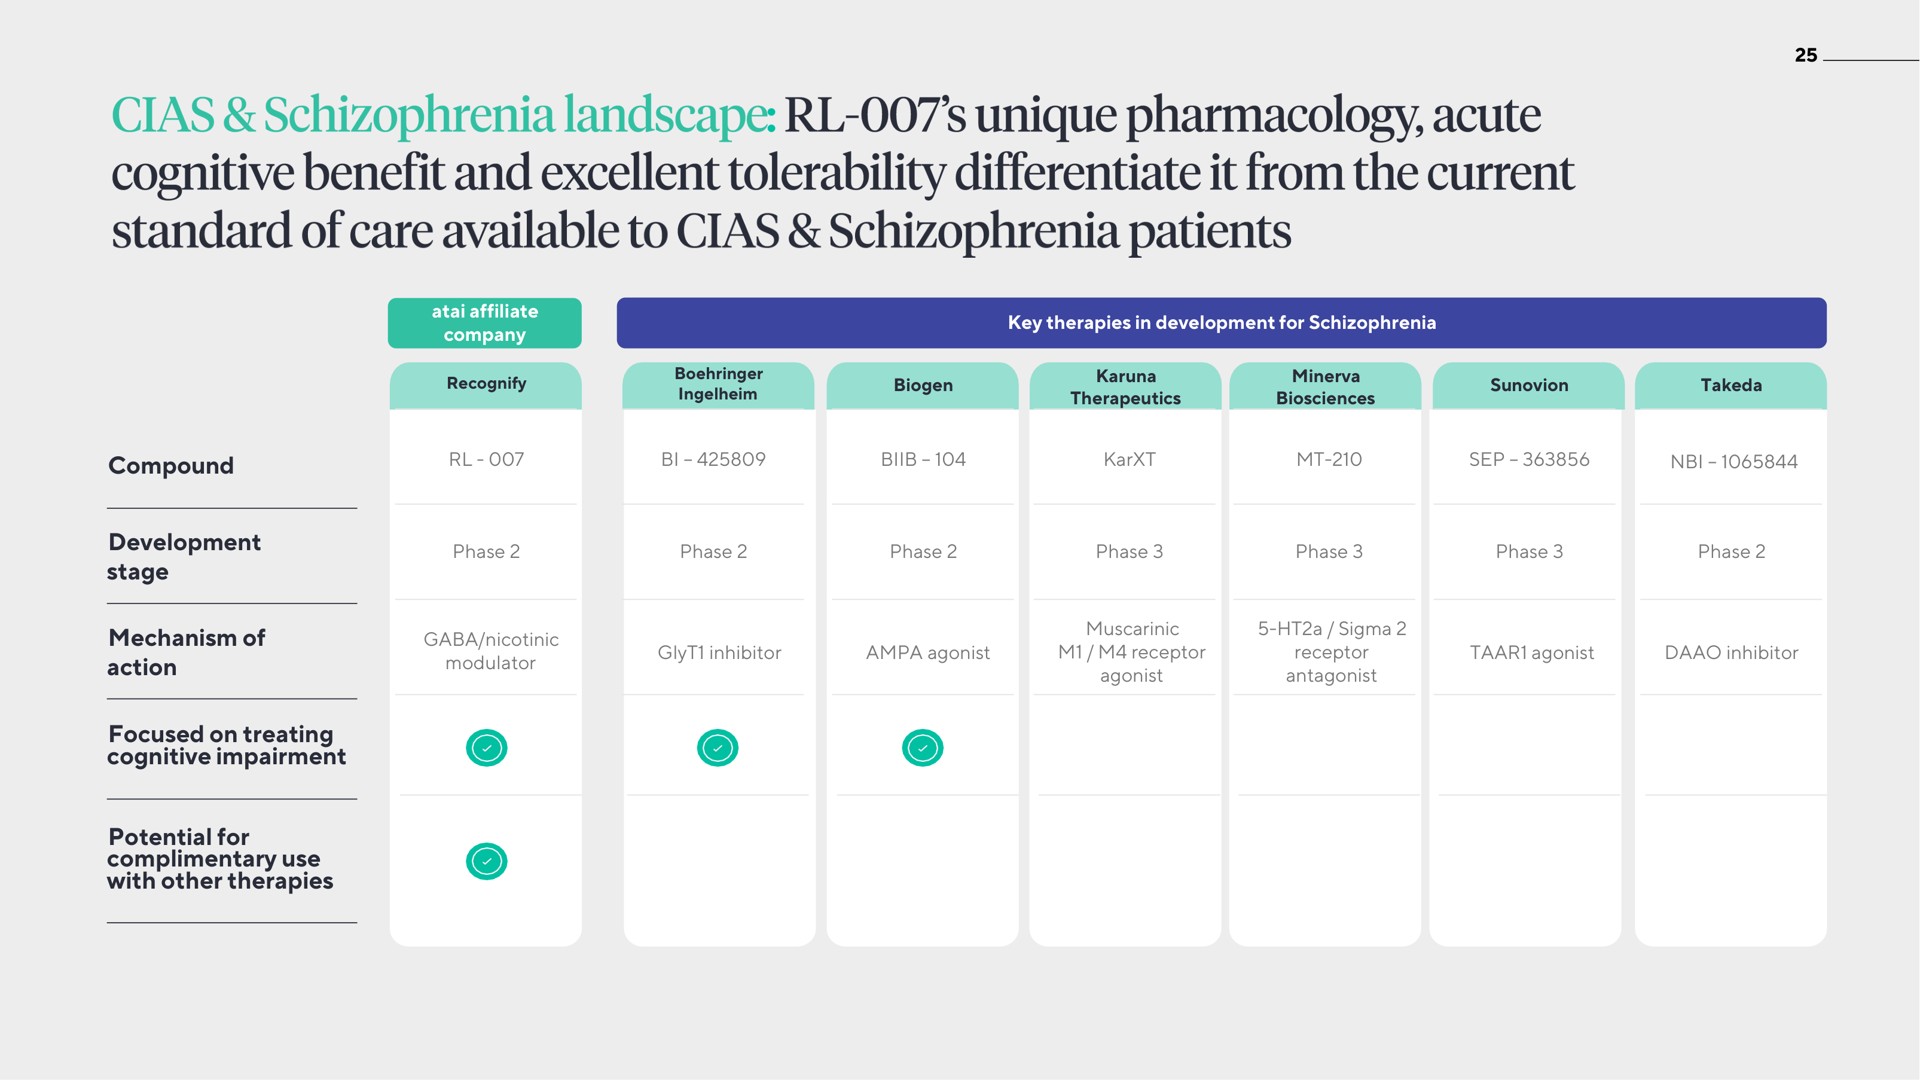 schizophrenia landscape unique pharmacology acute cognitive benefit and excellent tolerability differentiate it from the current standard of care available to schizophrenia patients | ATAI